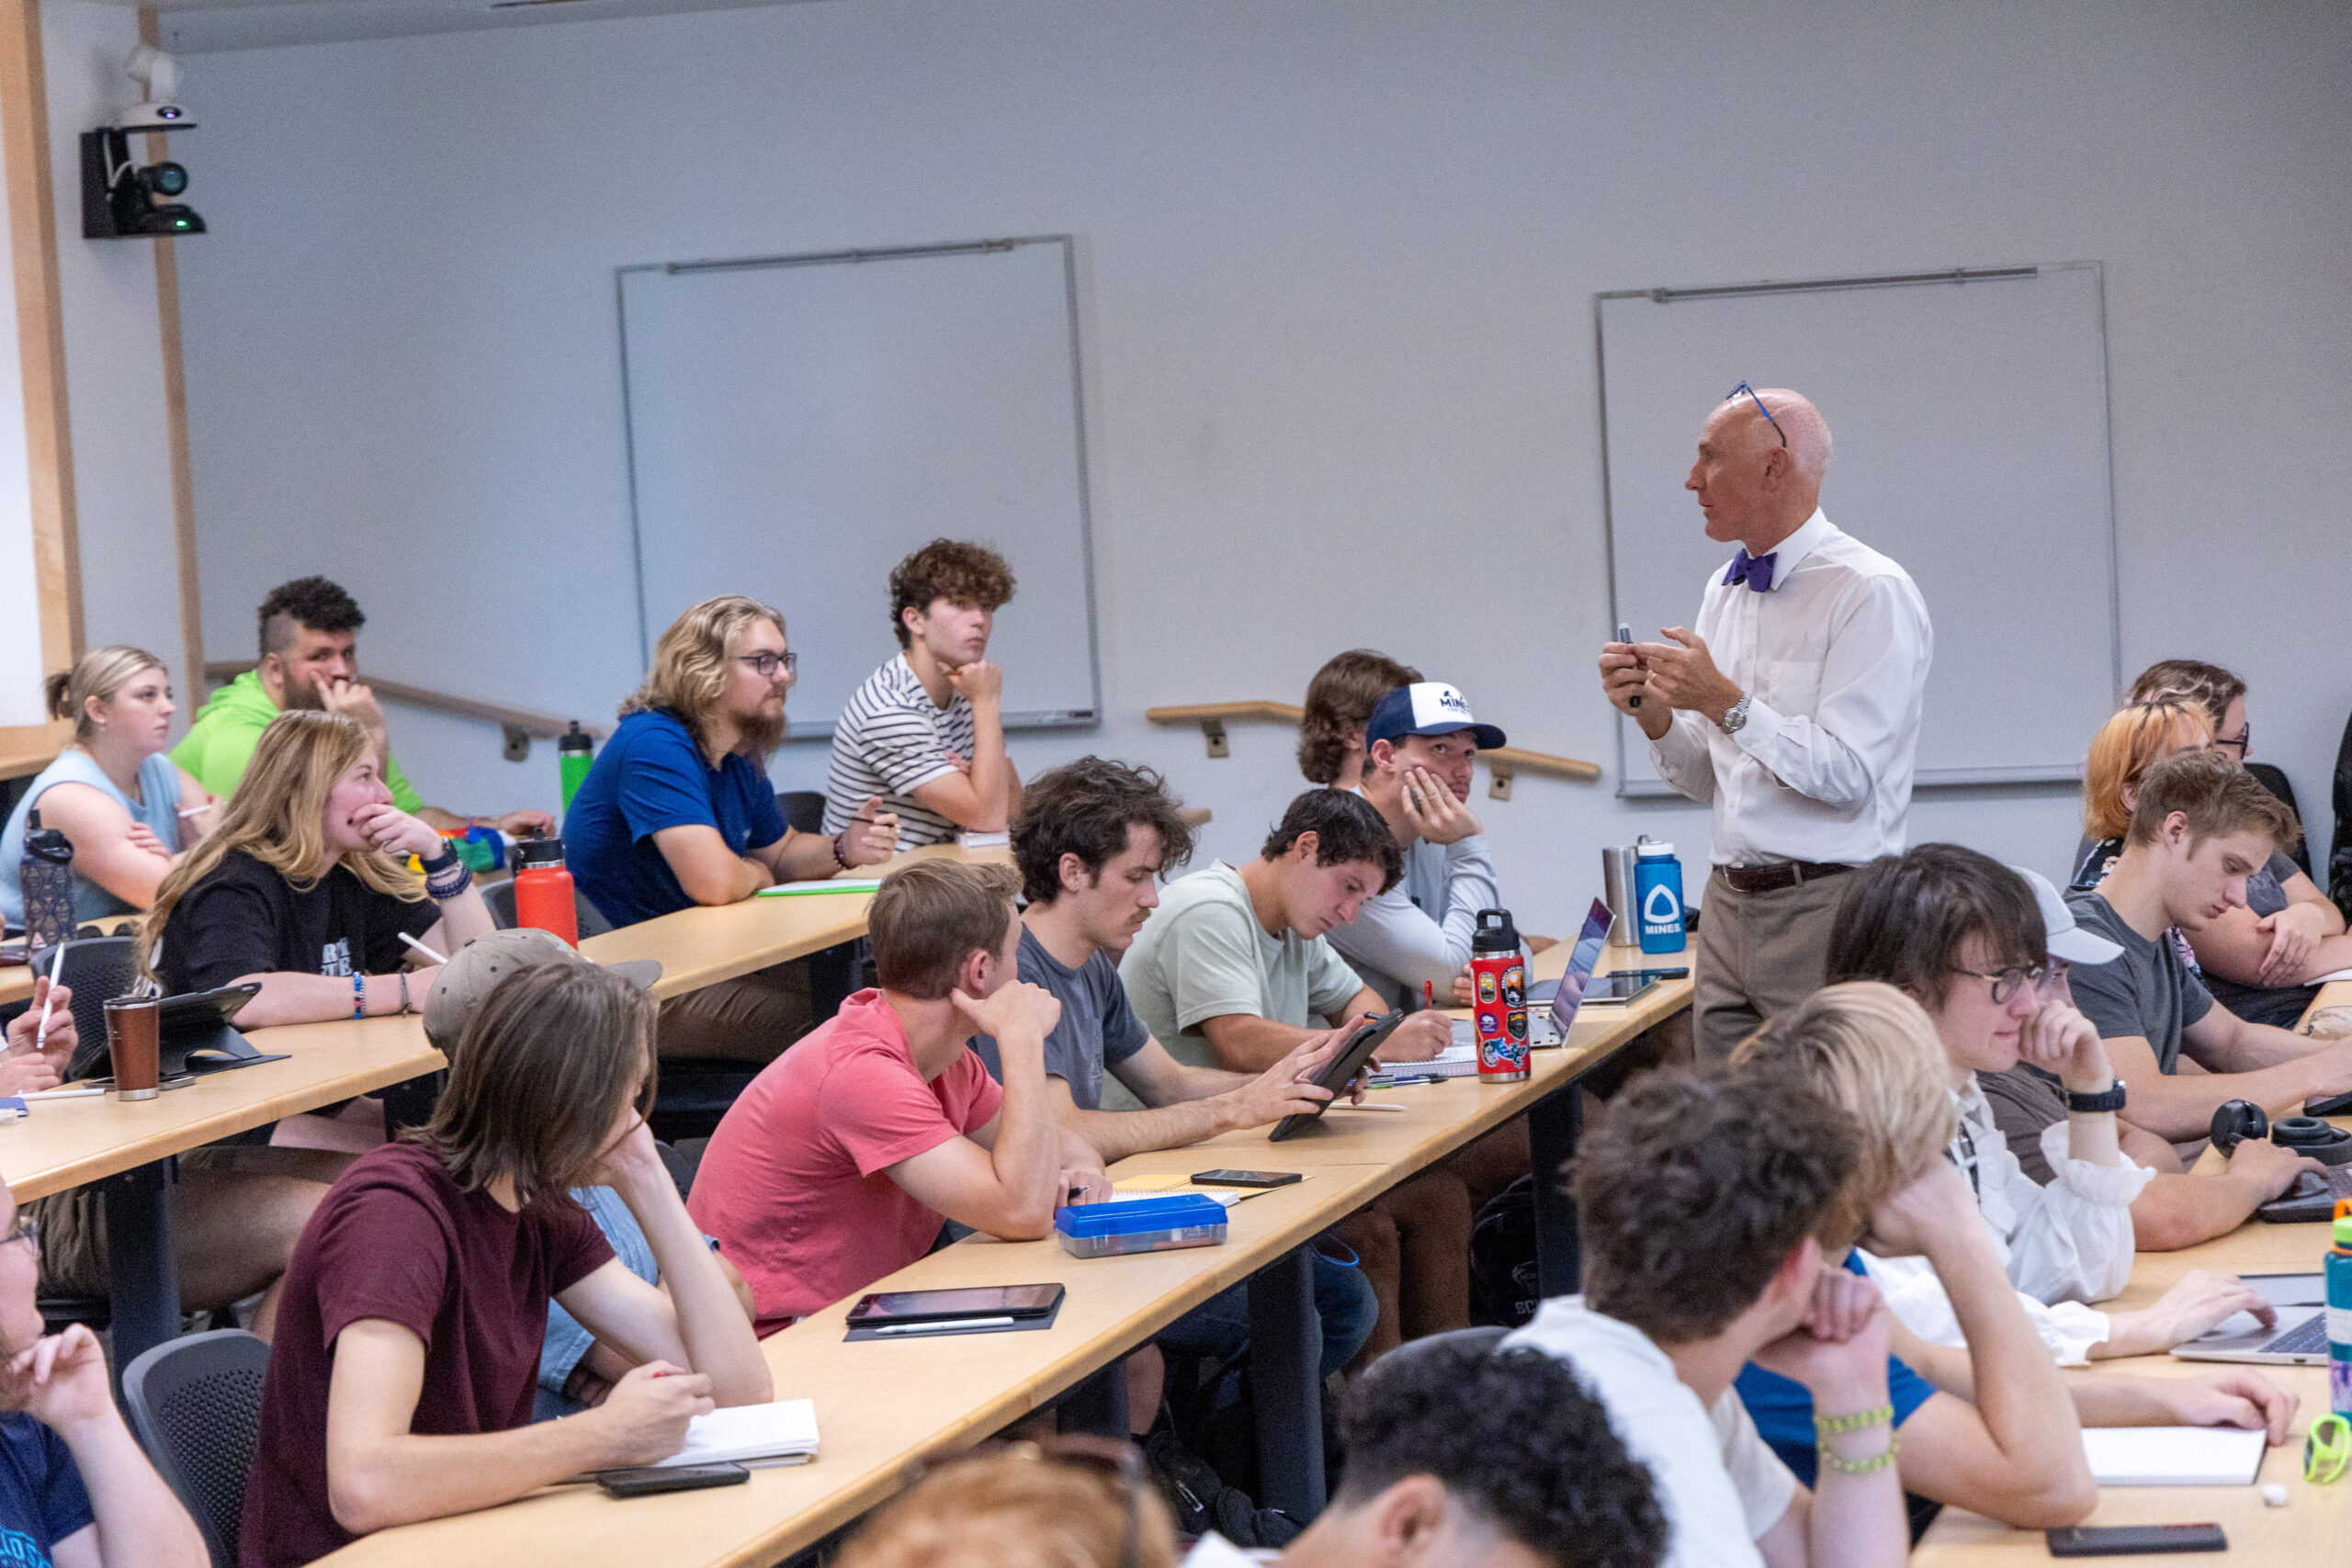 A professor teaching class in a lecture hall